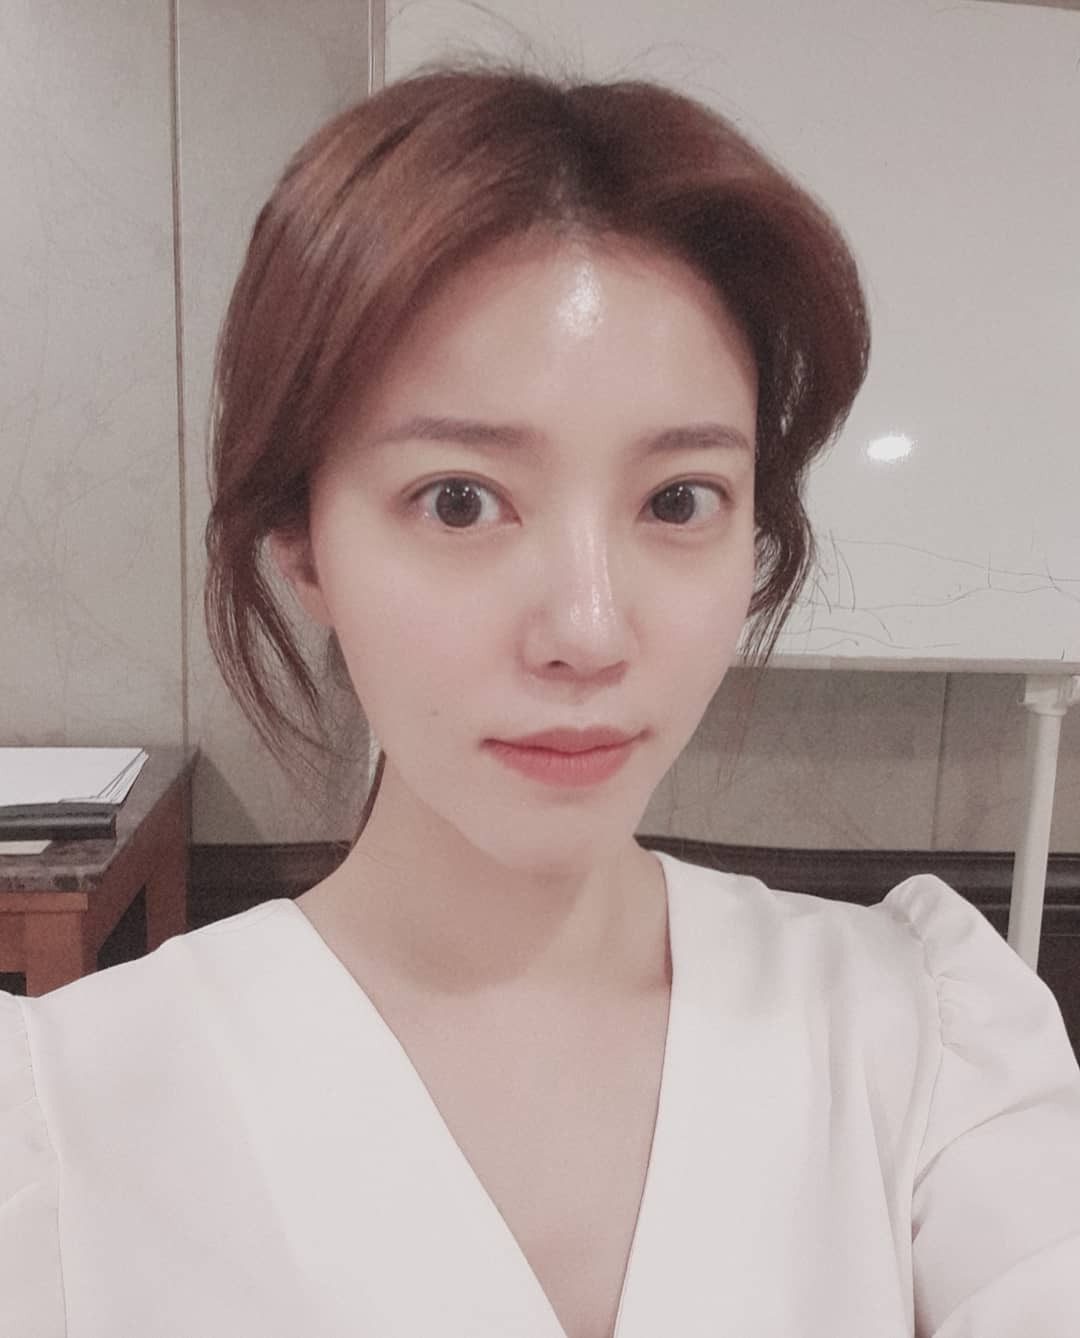 Actor Son Tae-young Lee Sung-kyung and others have encouraged social distance to prevent the spread of coronavirus infection-19 (hereinafter referred to as COVID-19) worldwide.Actor Son Tae-young said on his Instagram on the 23rd, Lets put social distance.This is a good time to see children, and revealed his husband, Actor Kwon Sang-woo and the childrens back.In addition, Son Tae-young said, I feel sorry and grateful for those who are working hard to fight COVID-19 in each place.Actor Lee Sung-kyung also attended the Special Video Prayer for the Country and the Nation held at Younghoon Ori Church on the 13th and practiced social distance.The government has recommended that facilities such as religious entertainment and sports be shut down until April 5.Lee Sung-kyung encouraged online worship, saying, I am grateful for the grace of God who made it possible to worship through video.Actor Lee Soo-kyung posted on his Instagram on the 17th that he was wearing a mask with the article Lets keep a social distance when drinking coffee.Actor Jungsia also announced on his Instagram on November 11 that Drama shooting was canceled and it was almost three weeks old.Meanwhile, Hollywood stars such as pop stars Ariana Grande and Lady Gaga also emphasized social distance by asking them to avoid places where people gather and to be as priceless as possible.